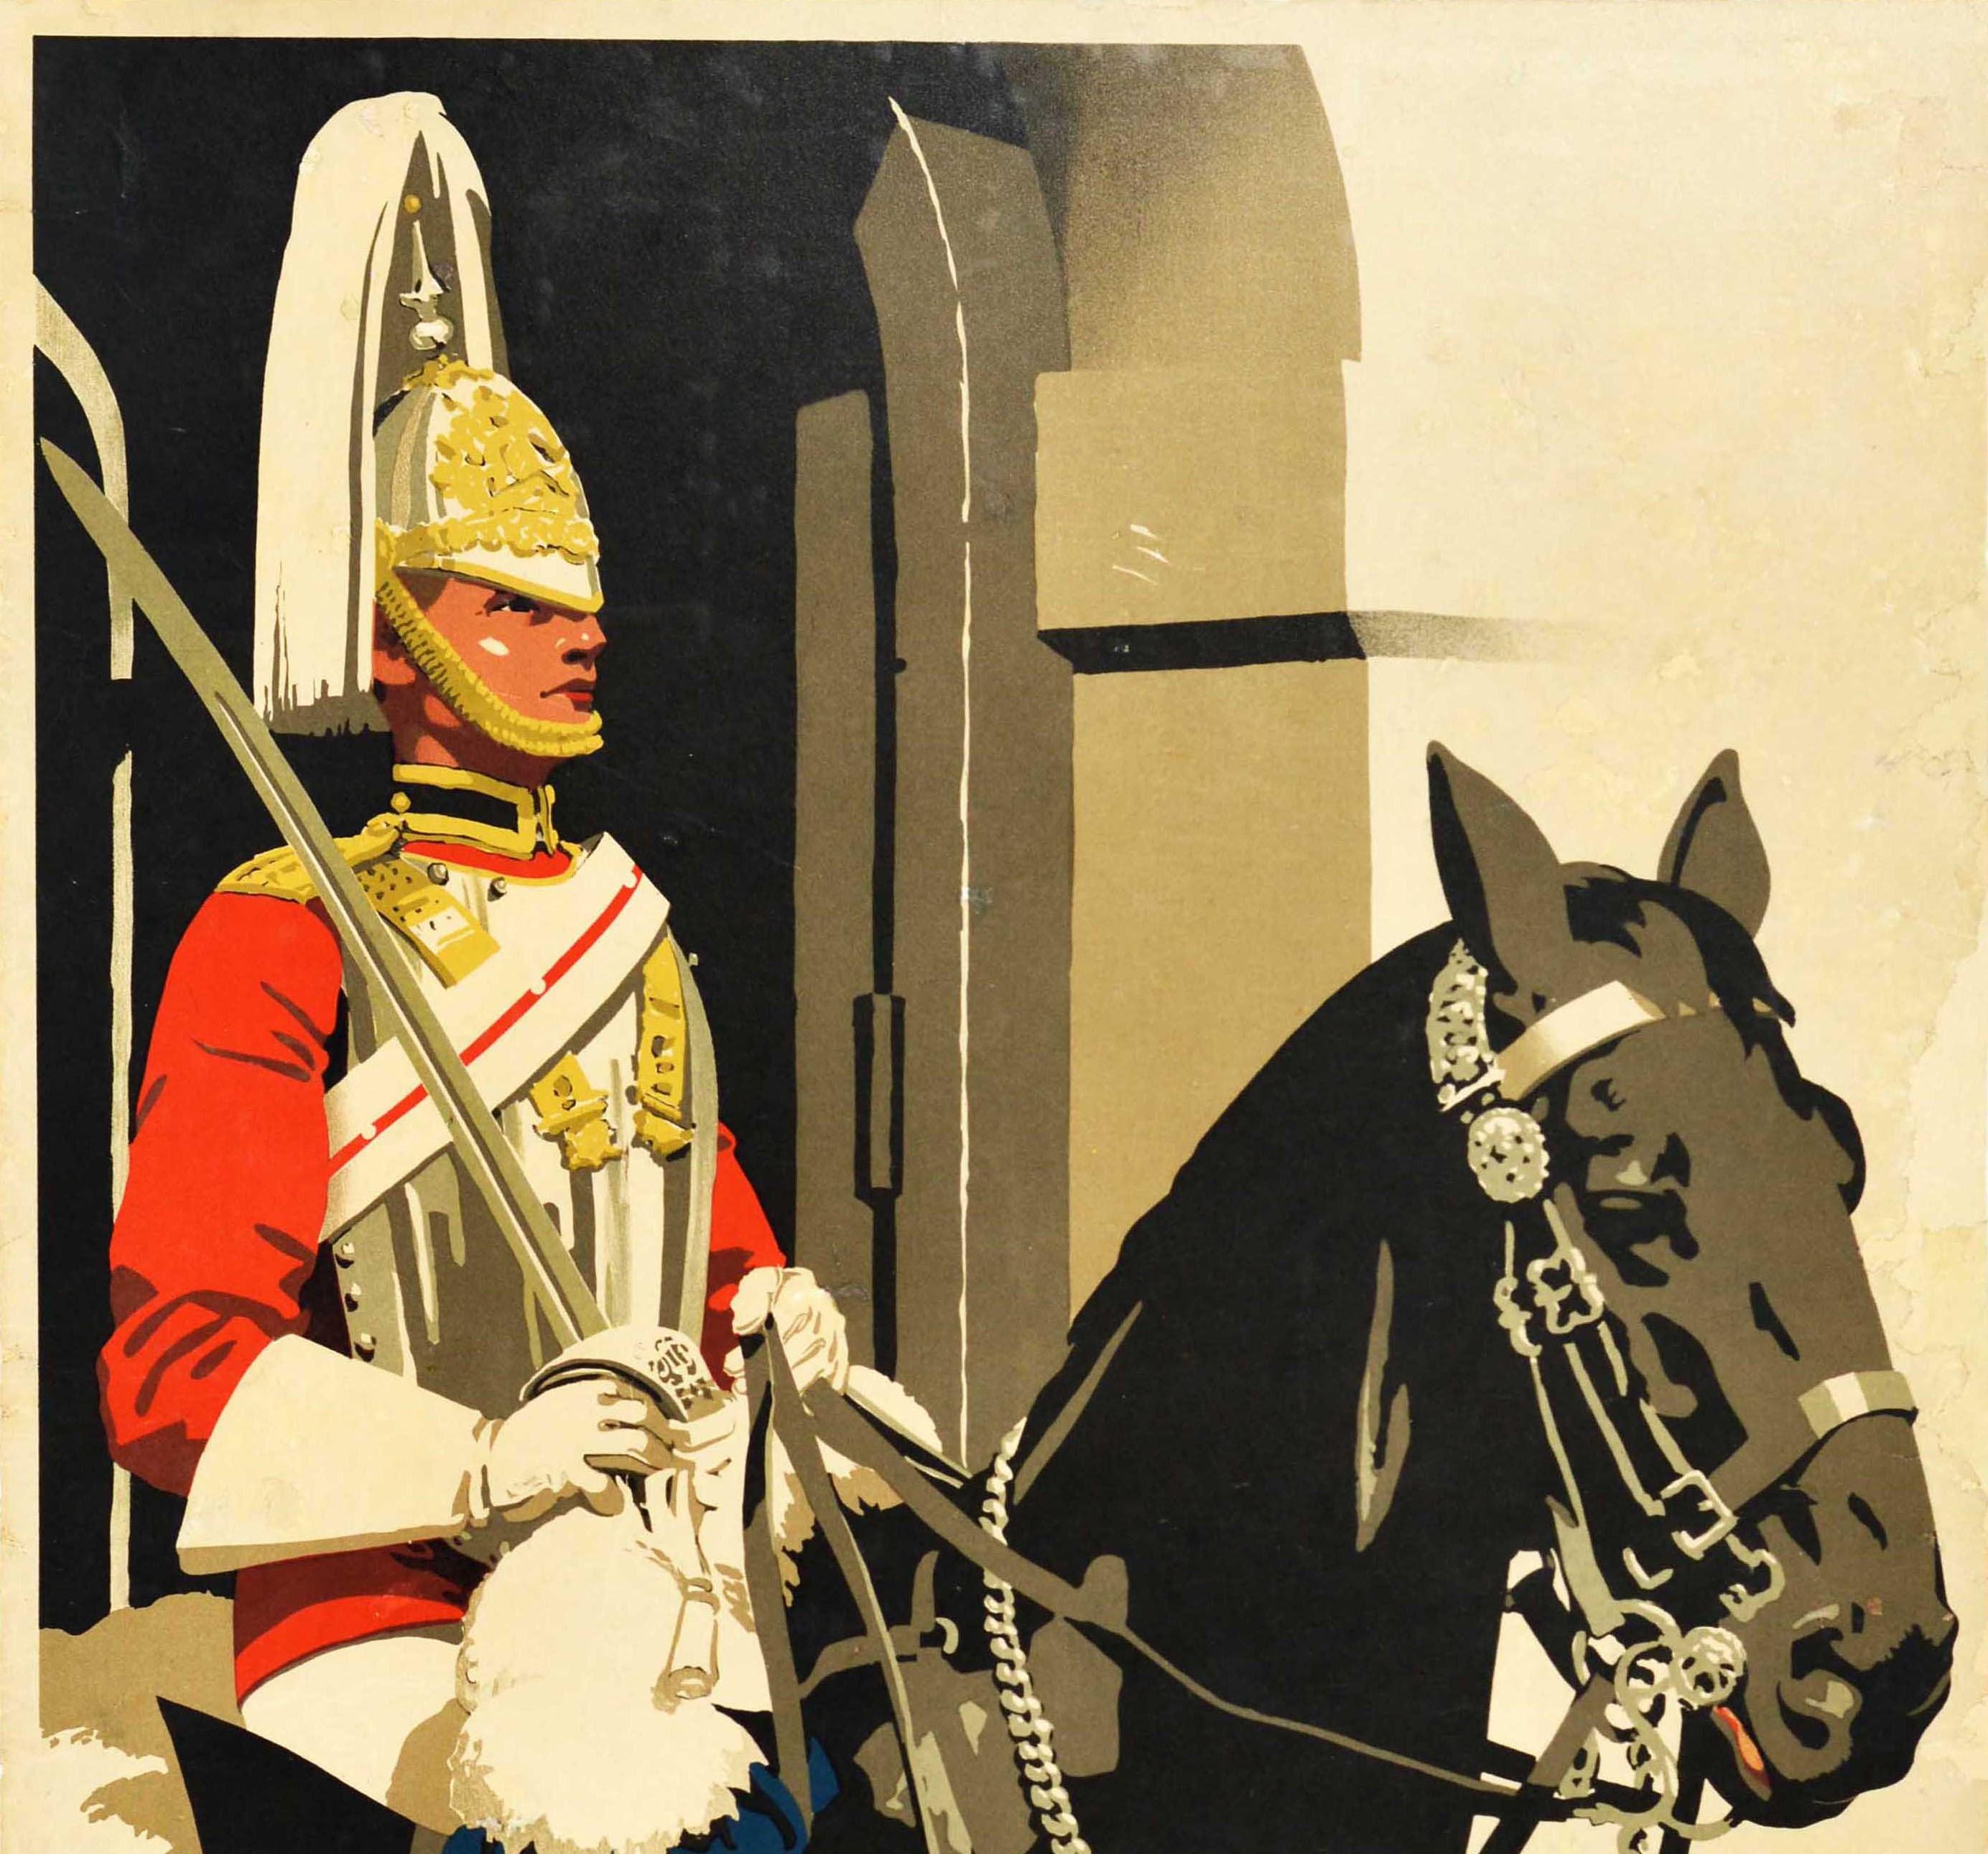 Original Vintage Rail Travel Poster London Heart Of The Empire GWR Horse Guard - Print by Frank Newbould